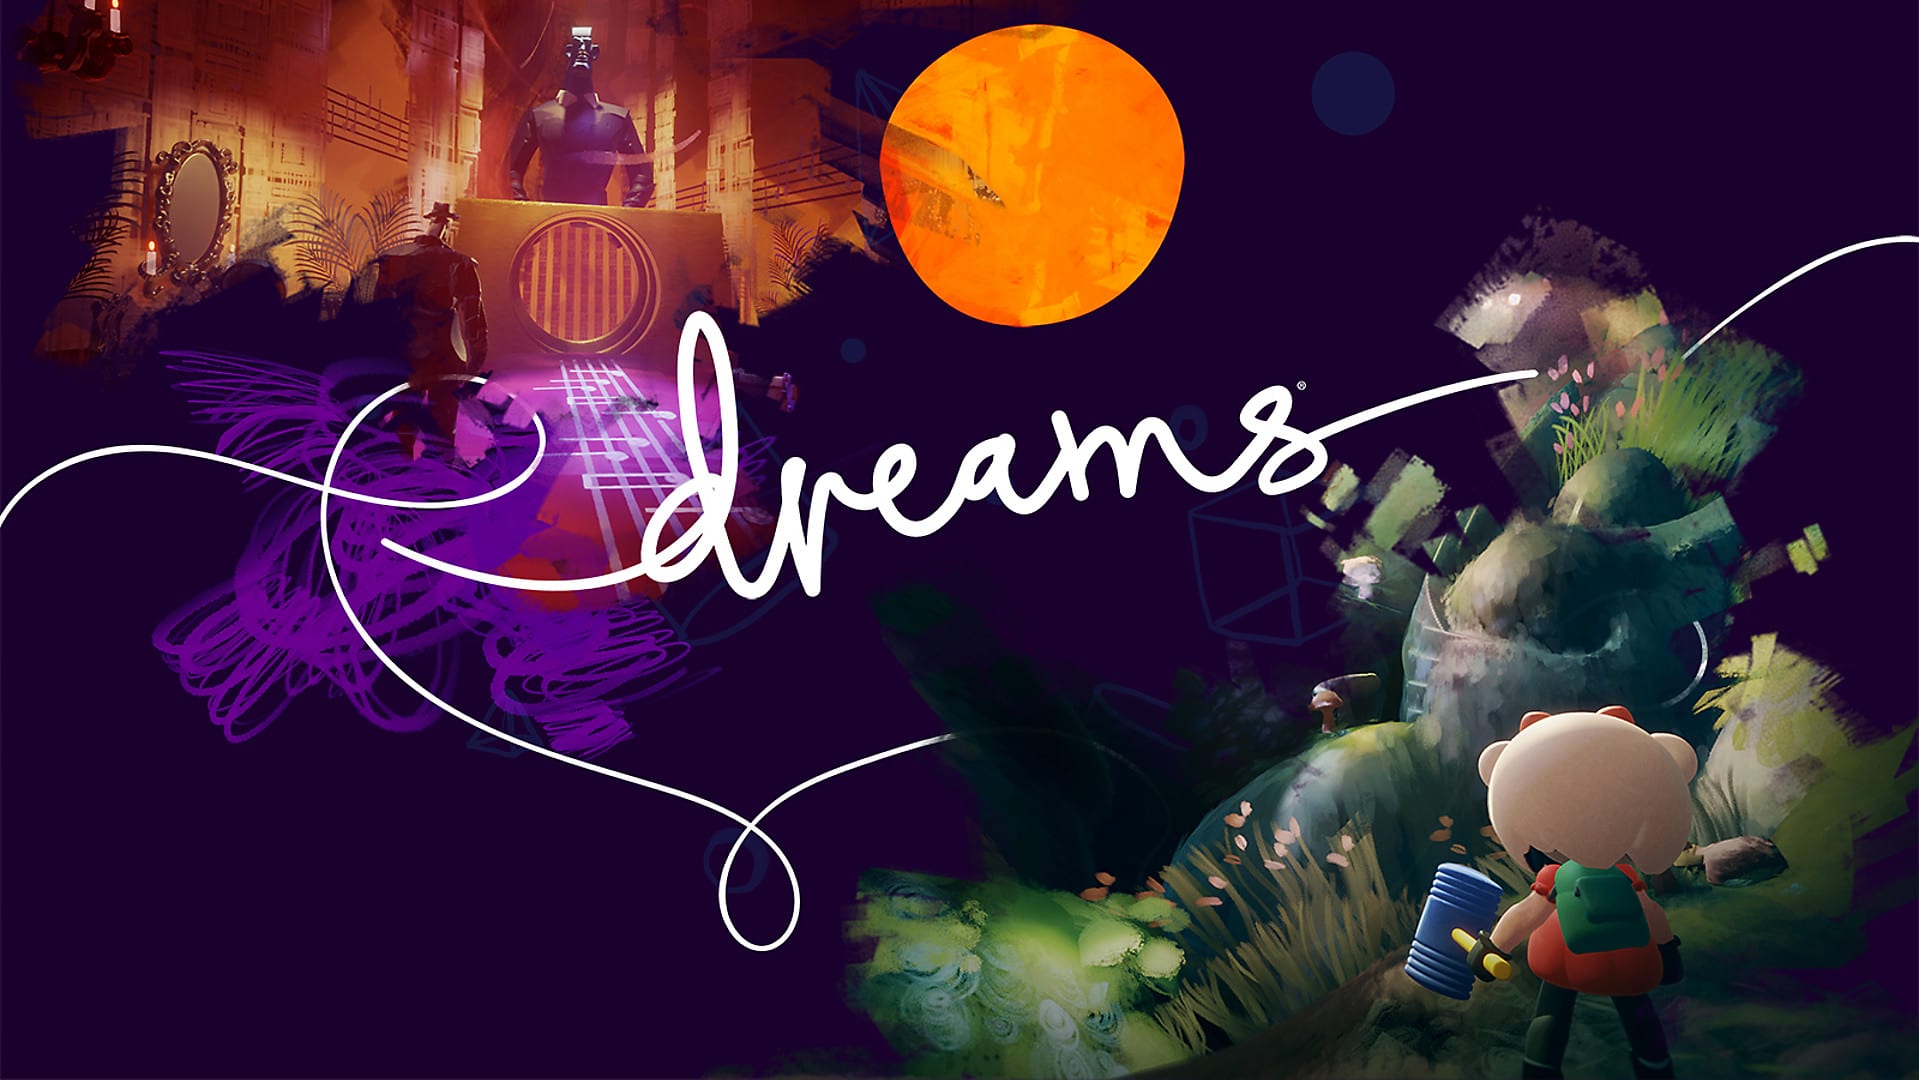 PS VR Support Comes To Dreams On July 22